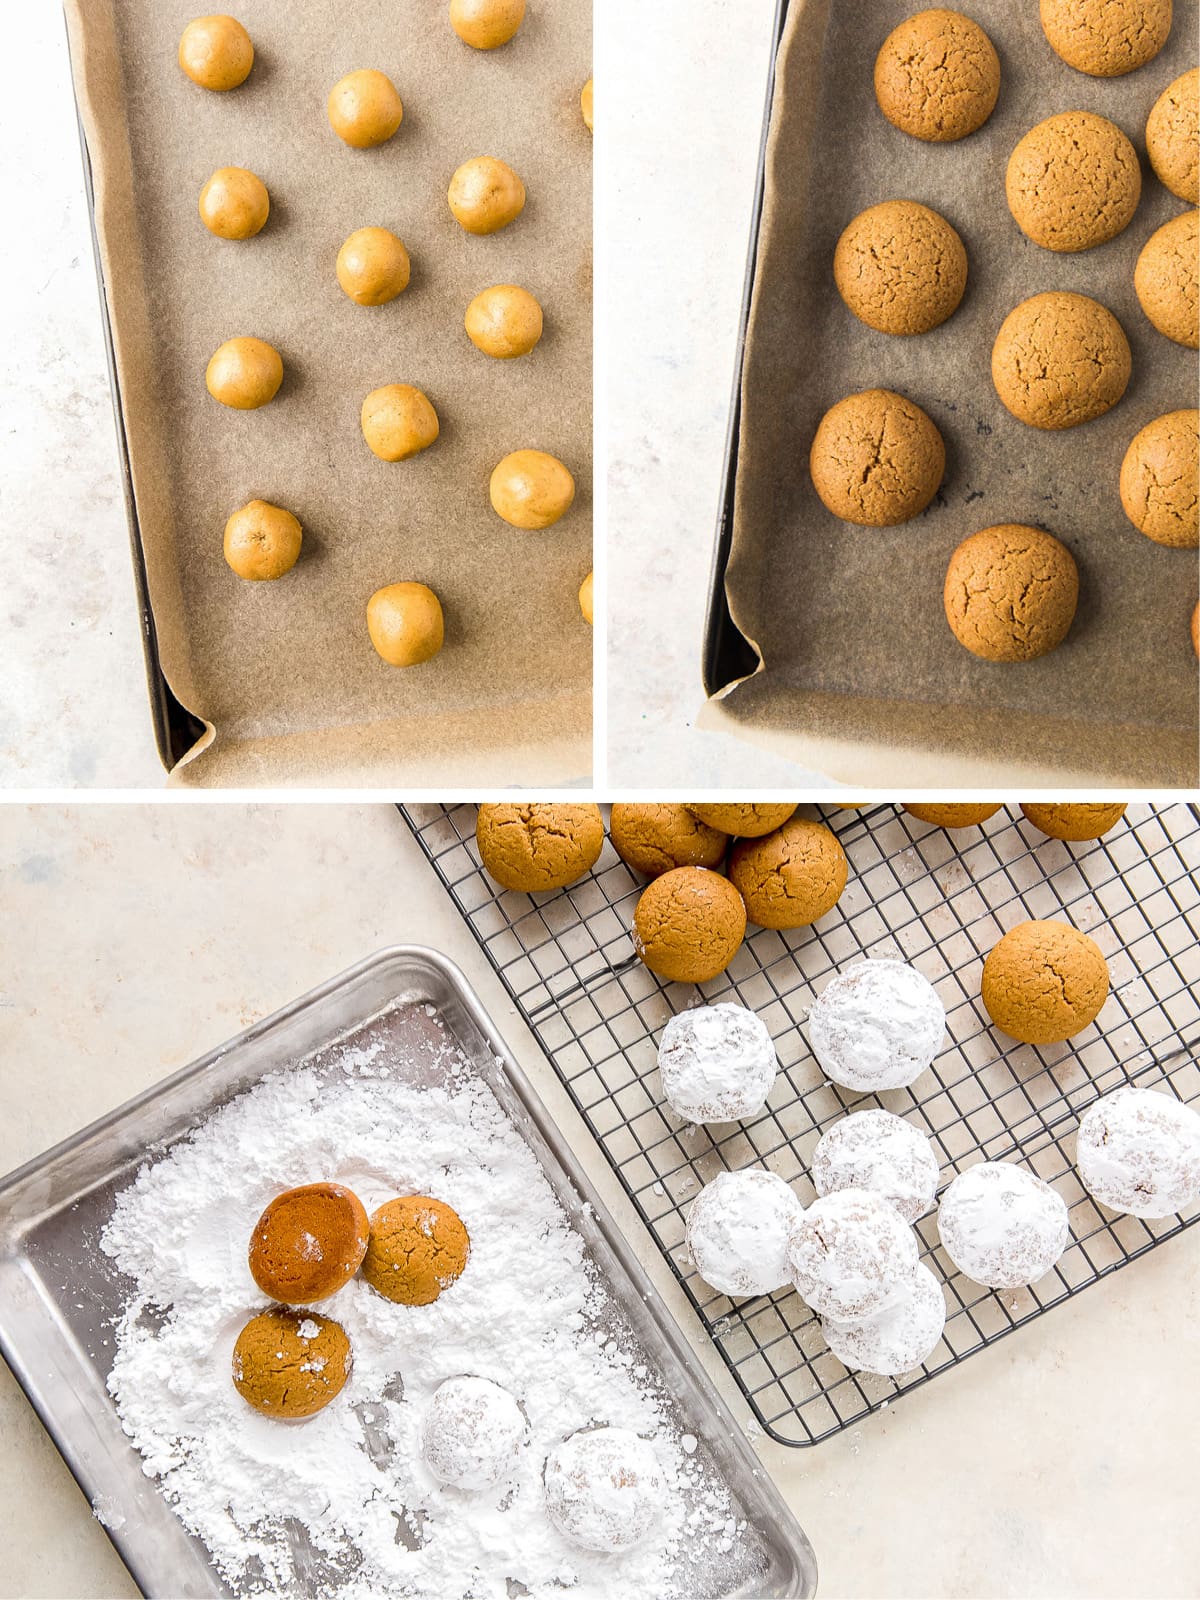 photo collage showing pfeffernusse before and after baking and coating in confectioners' sugar